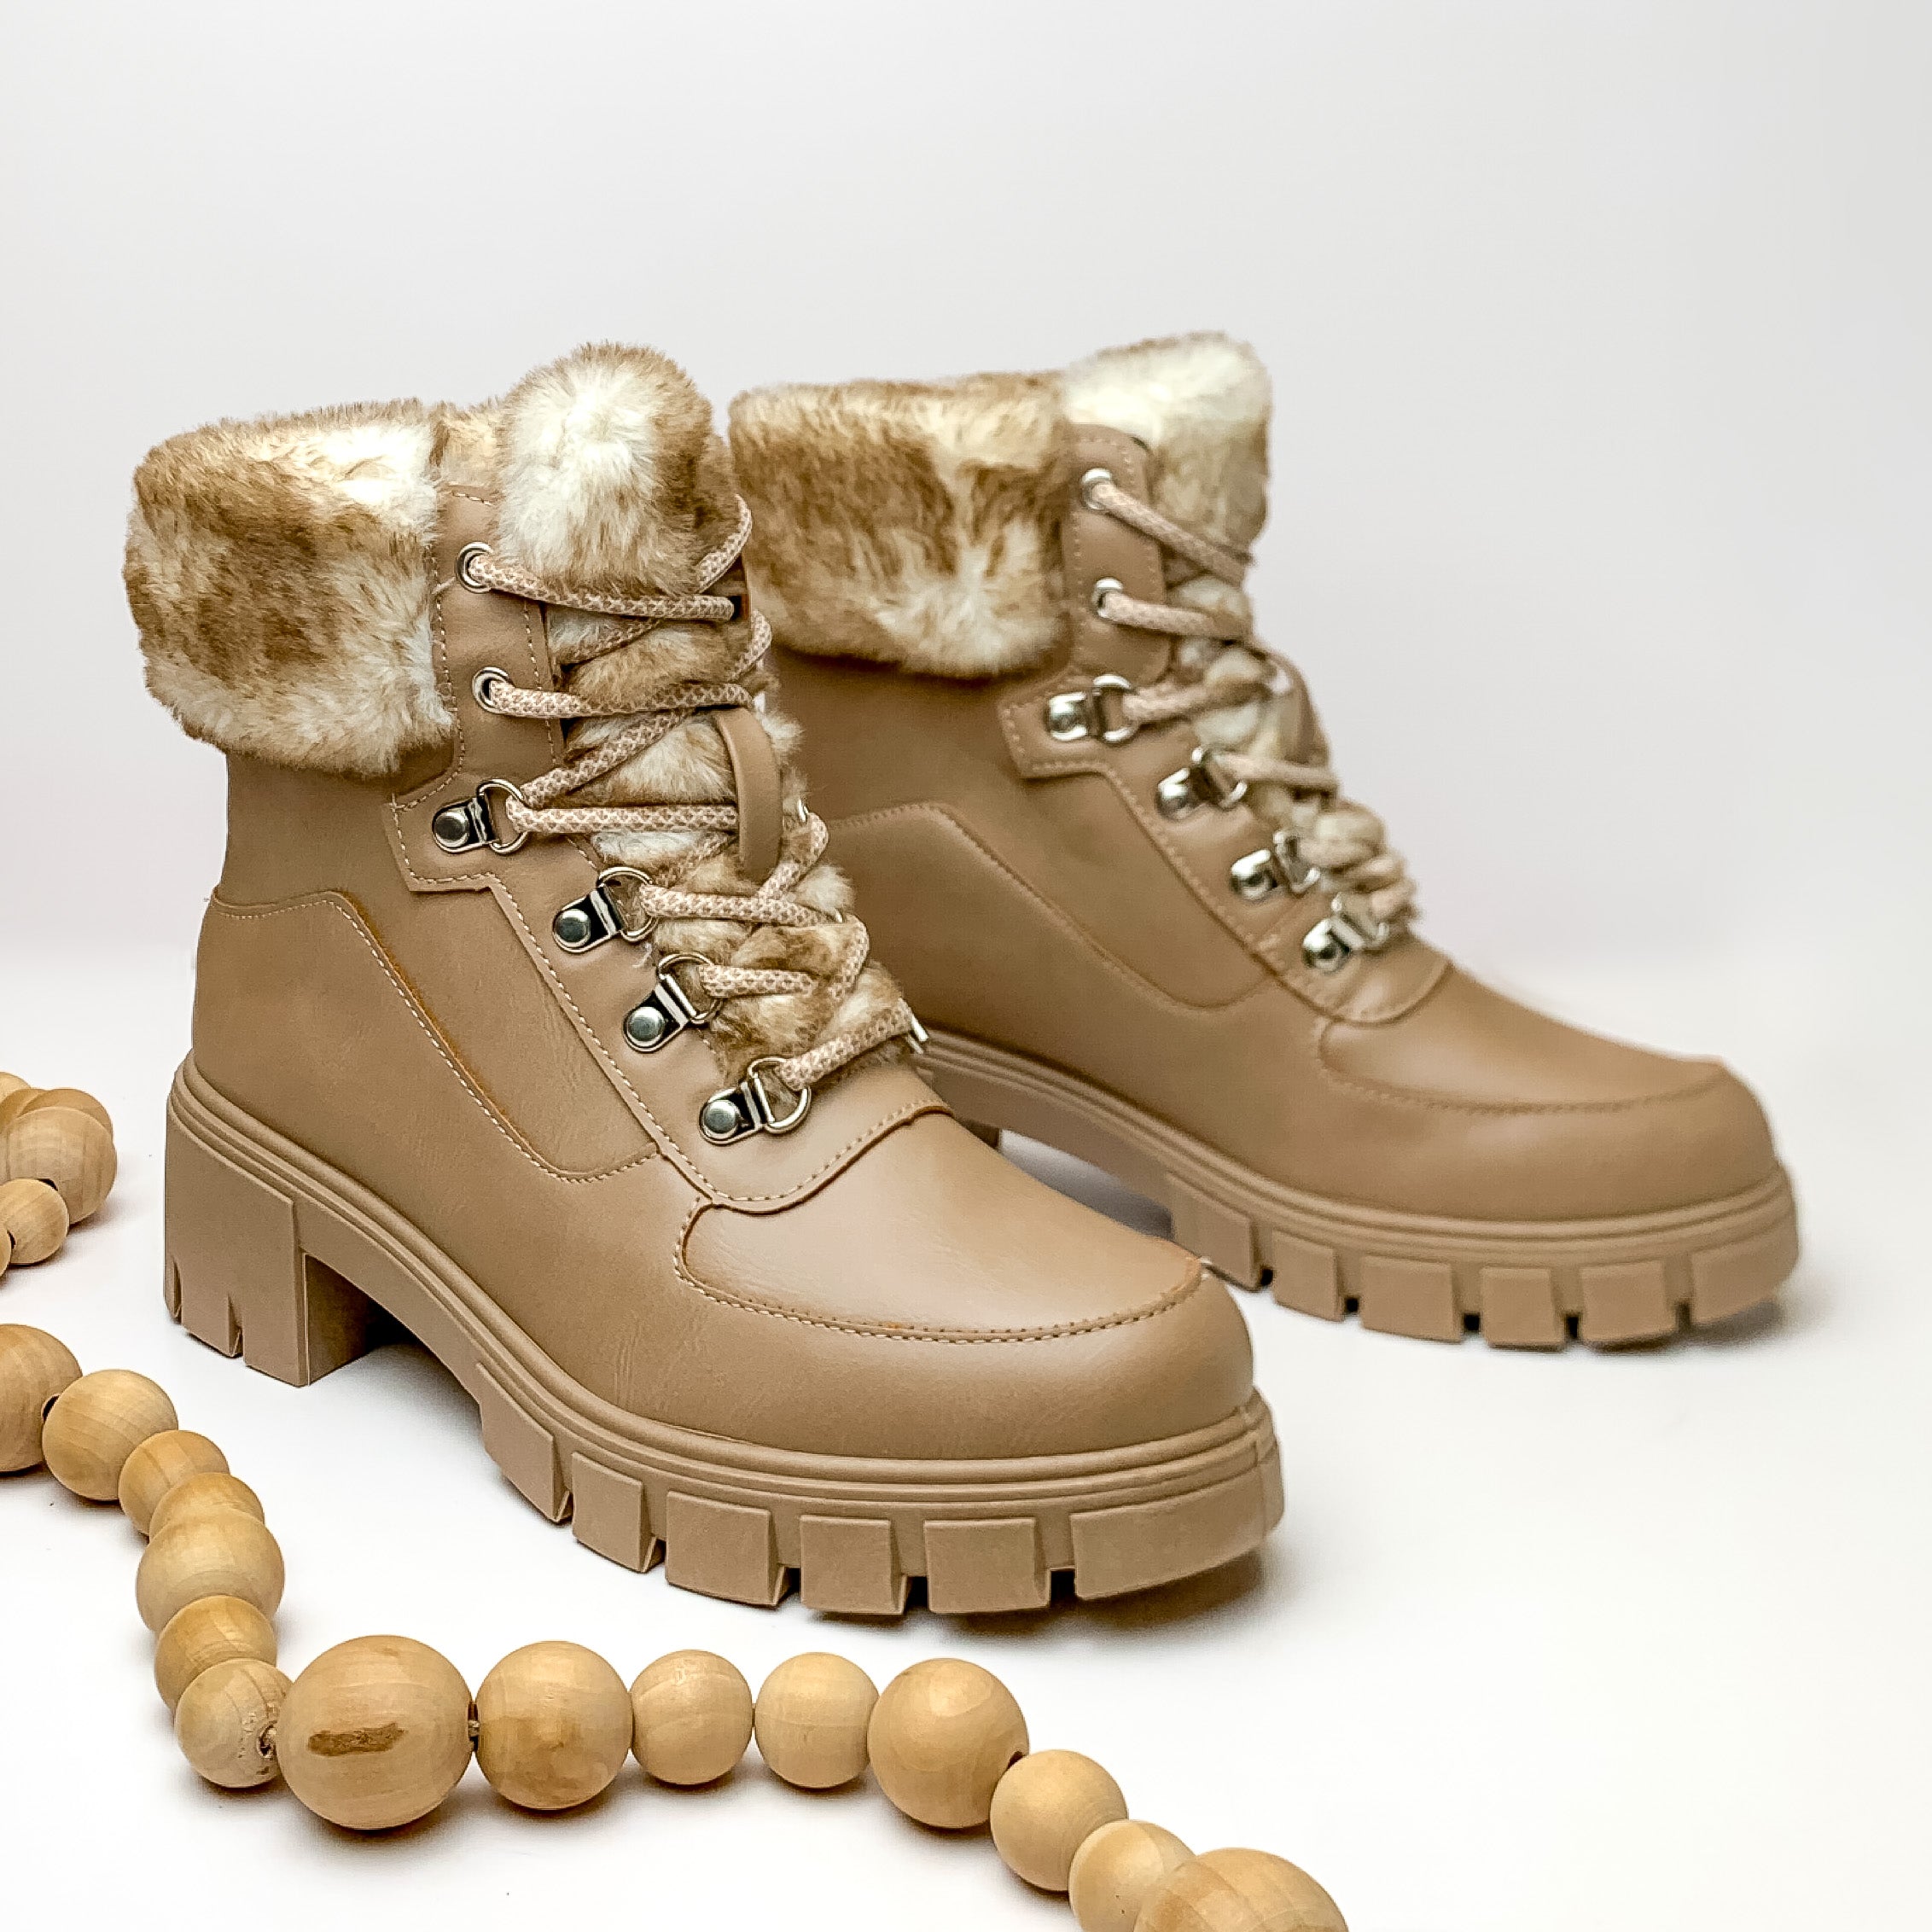 Faux fur lined lace up chunky heel booties in taupe. Pictured on white background with light tan beads.